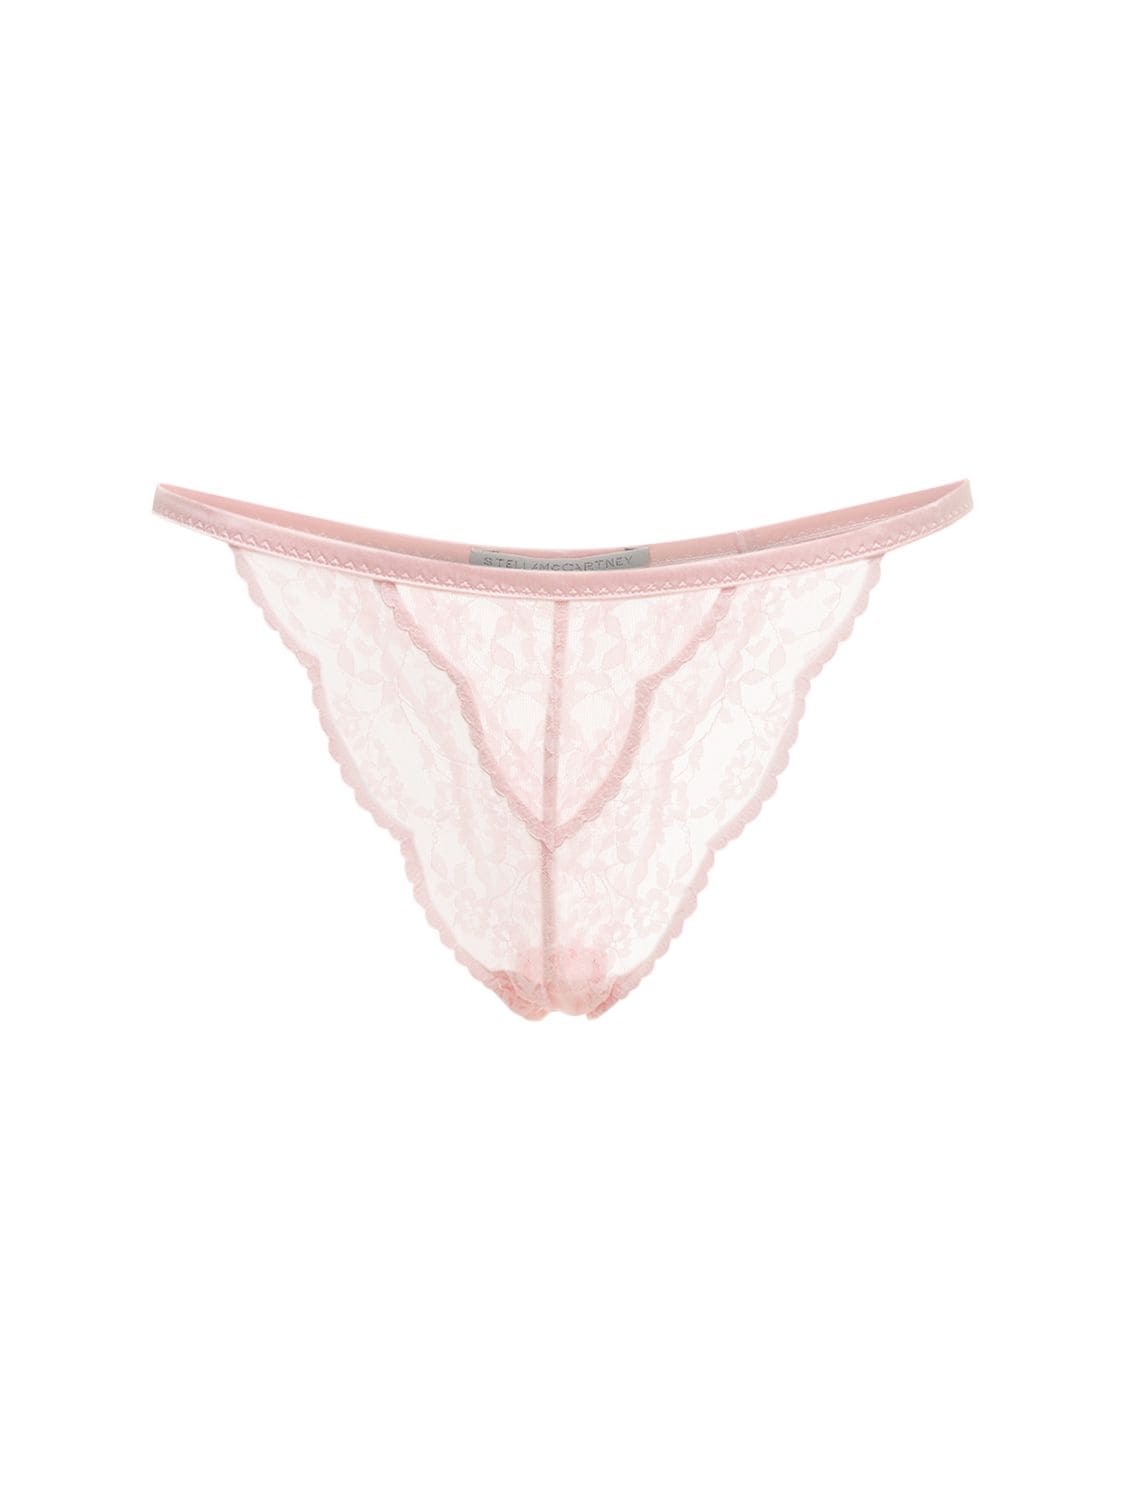 Clementine Glancing Lace Low Rise Thong